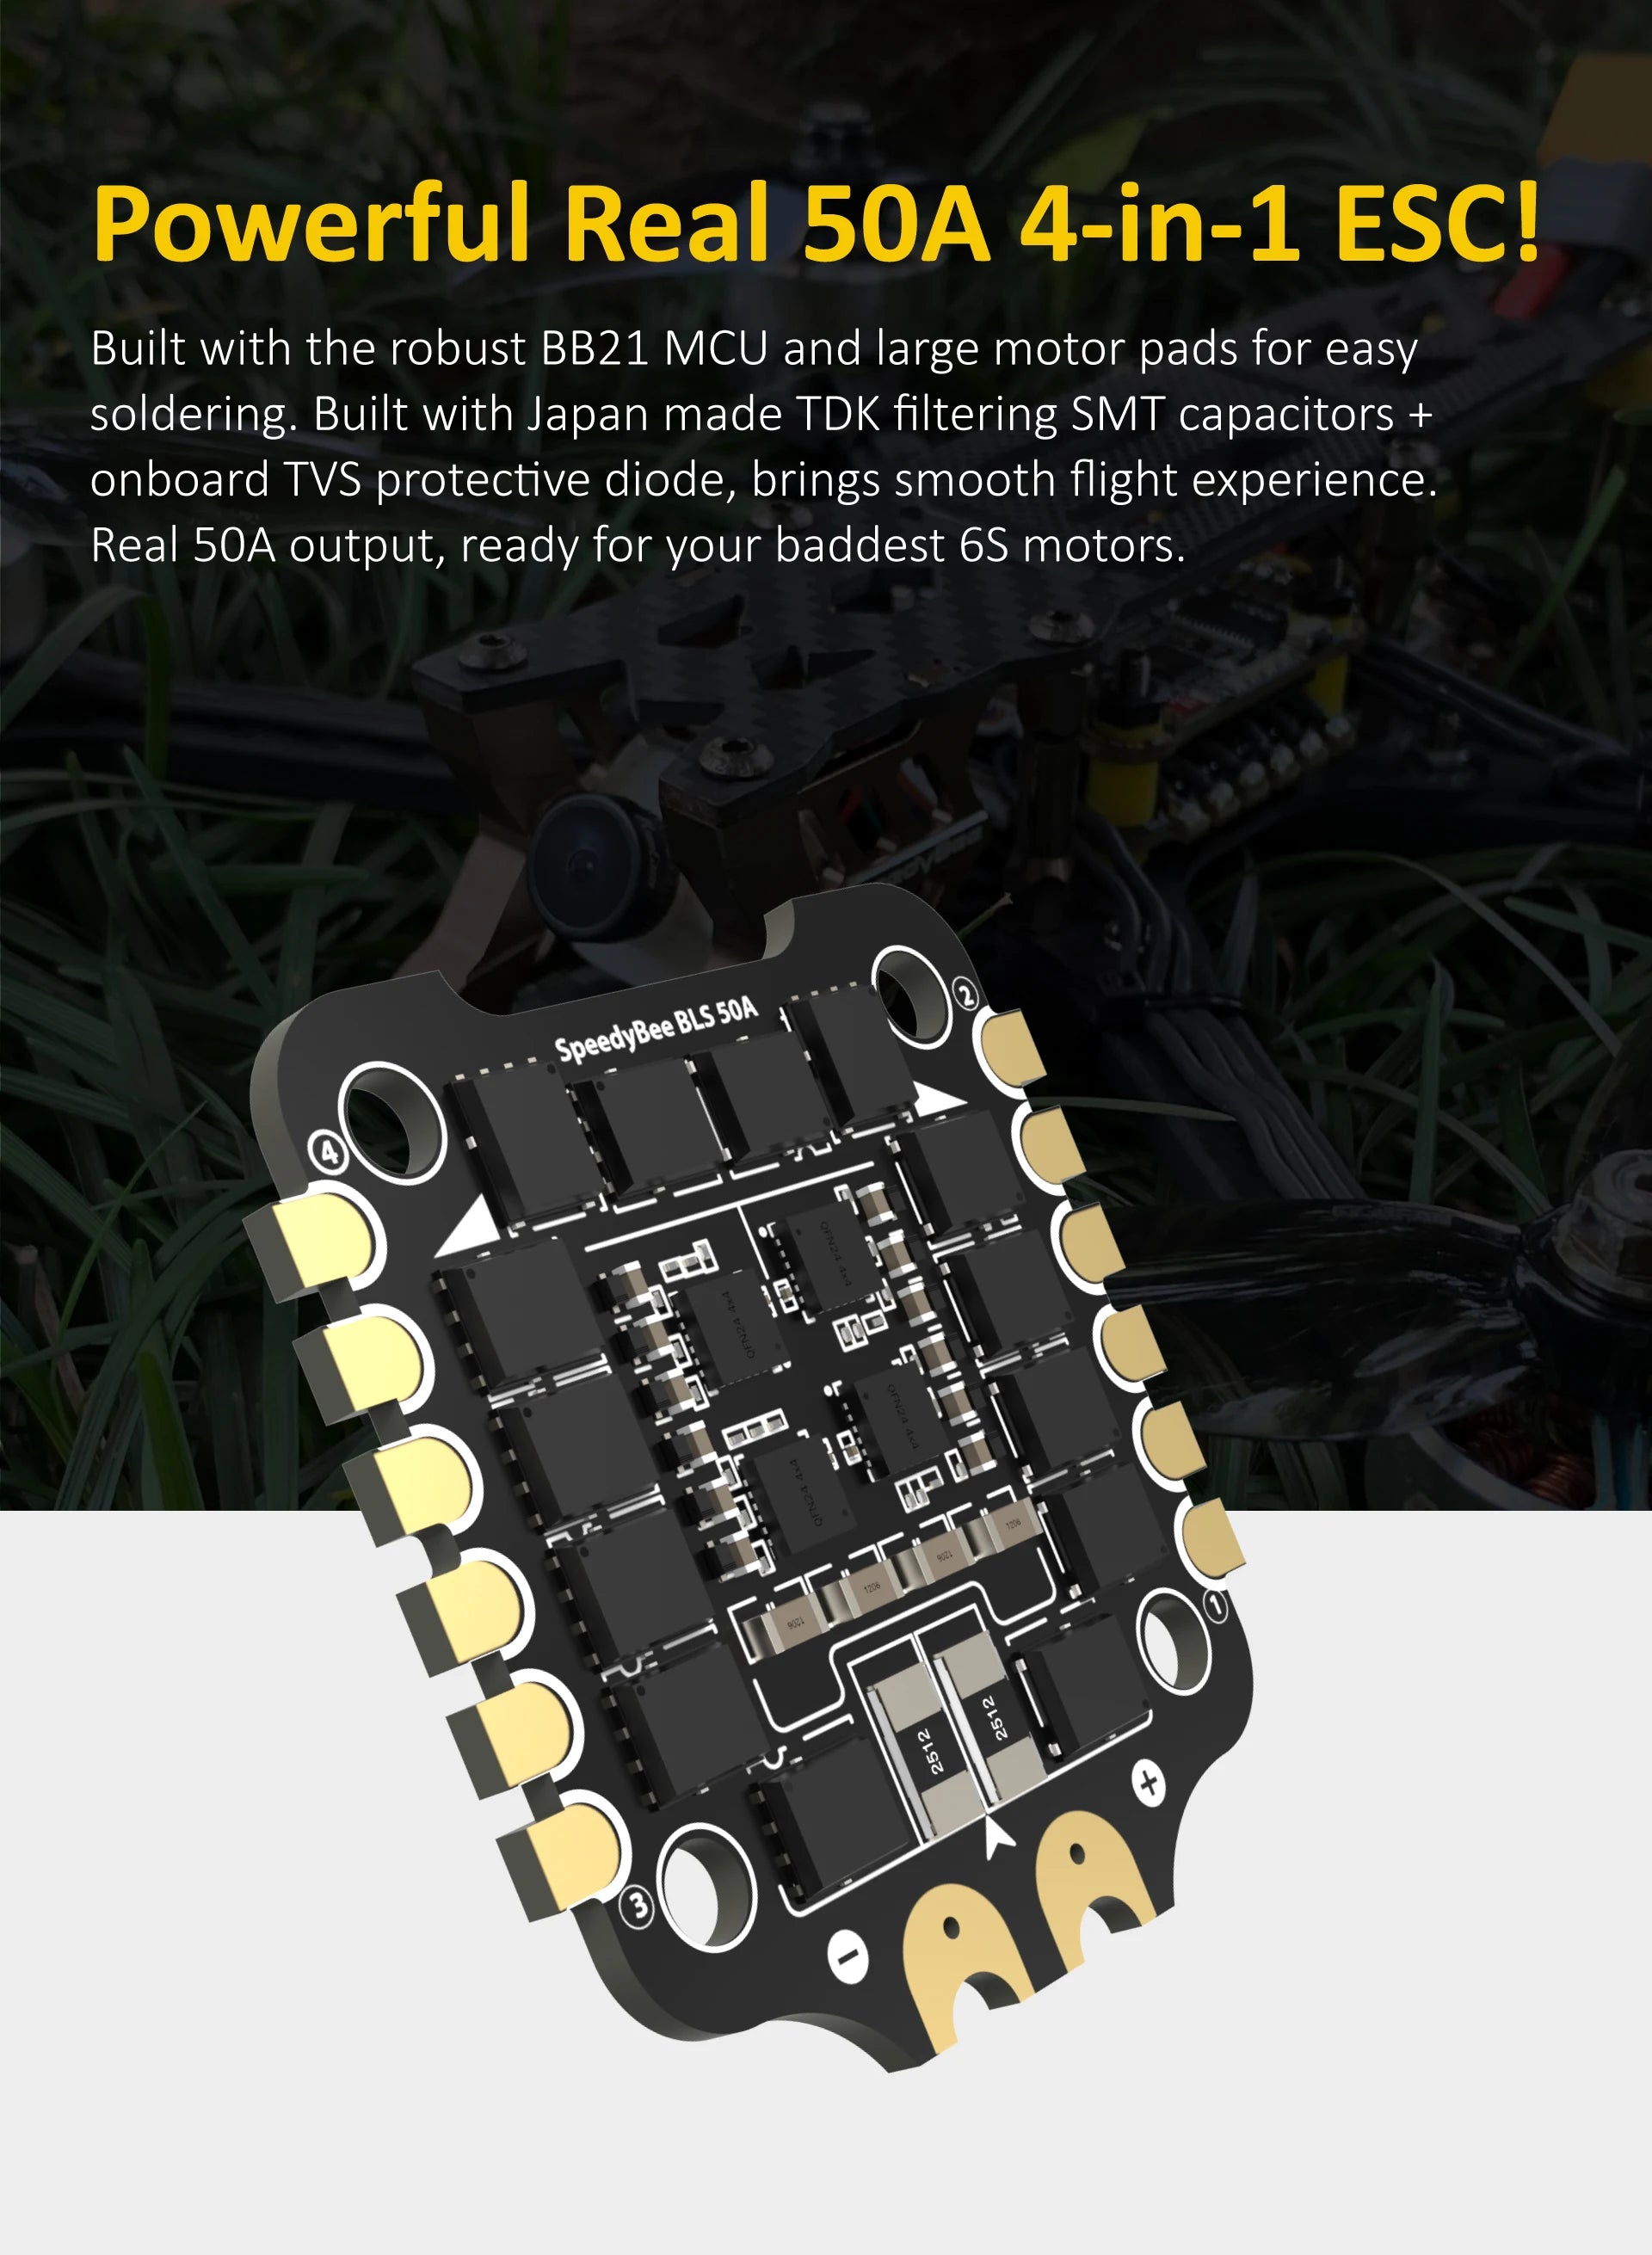 SpeedyBee F405 V3 BLS 50A 30x30 FC&ESC Stack, Built with the robust BB21 MCU and large motor pads for easy soldering,